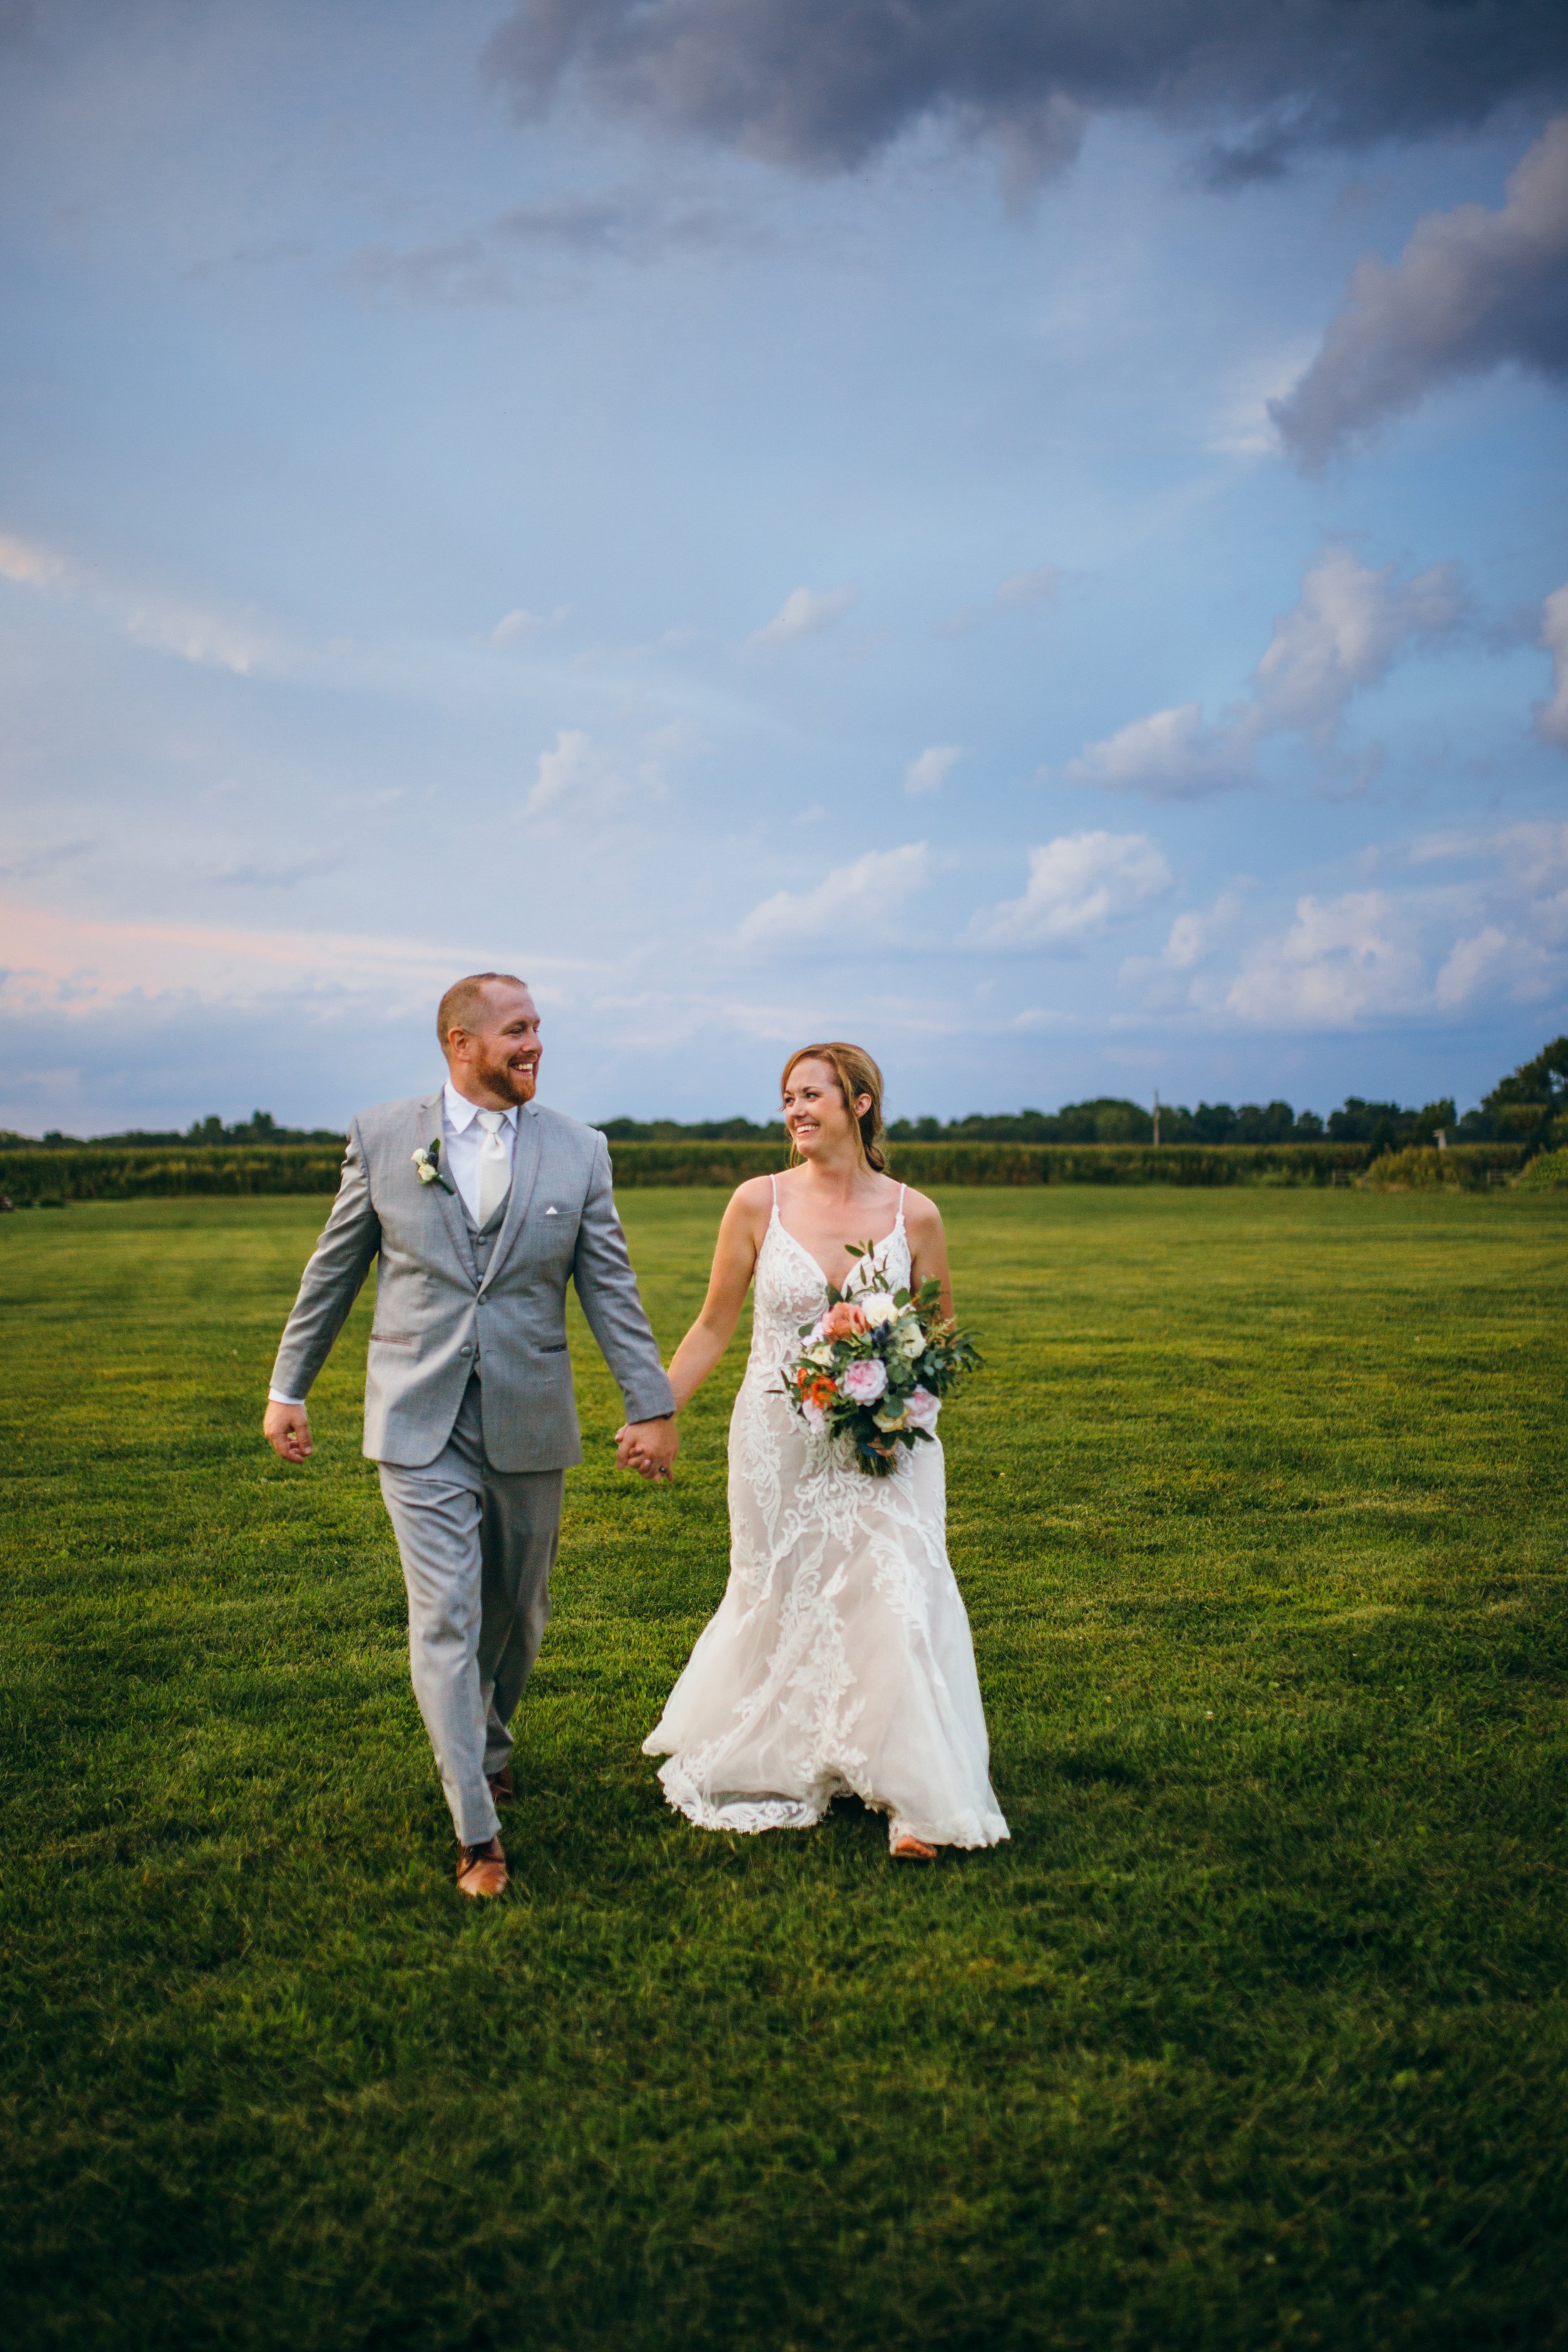  In the Illinois Valley, a bride and groom hold hands and look into each other's eyes by Teala Ward Photography. dramatic wedding portraits #TealaWardPhotography #IllinoisValleyPhotographer #summerwedding #TealaWardWeddings #Illinoisweddings  